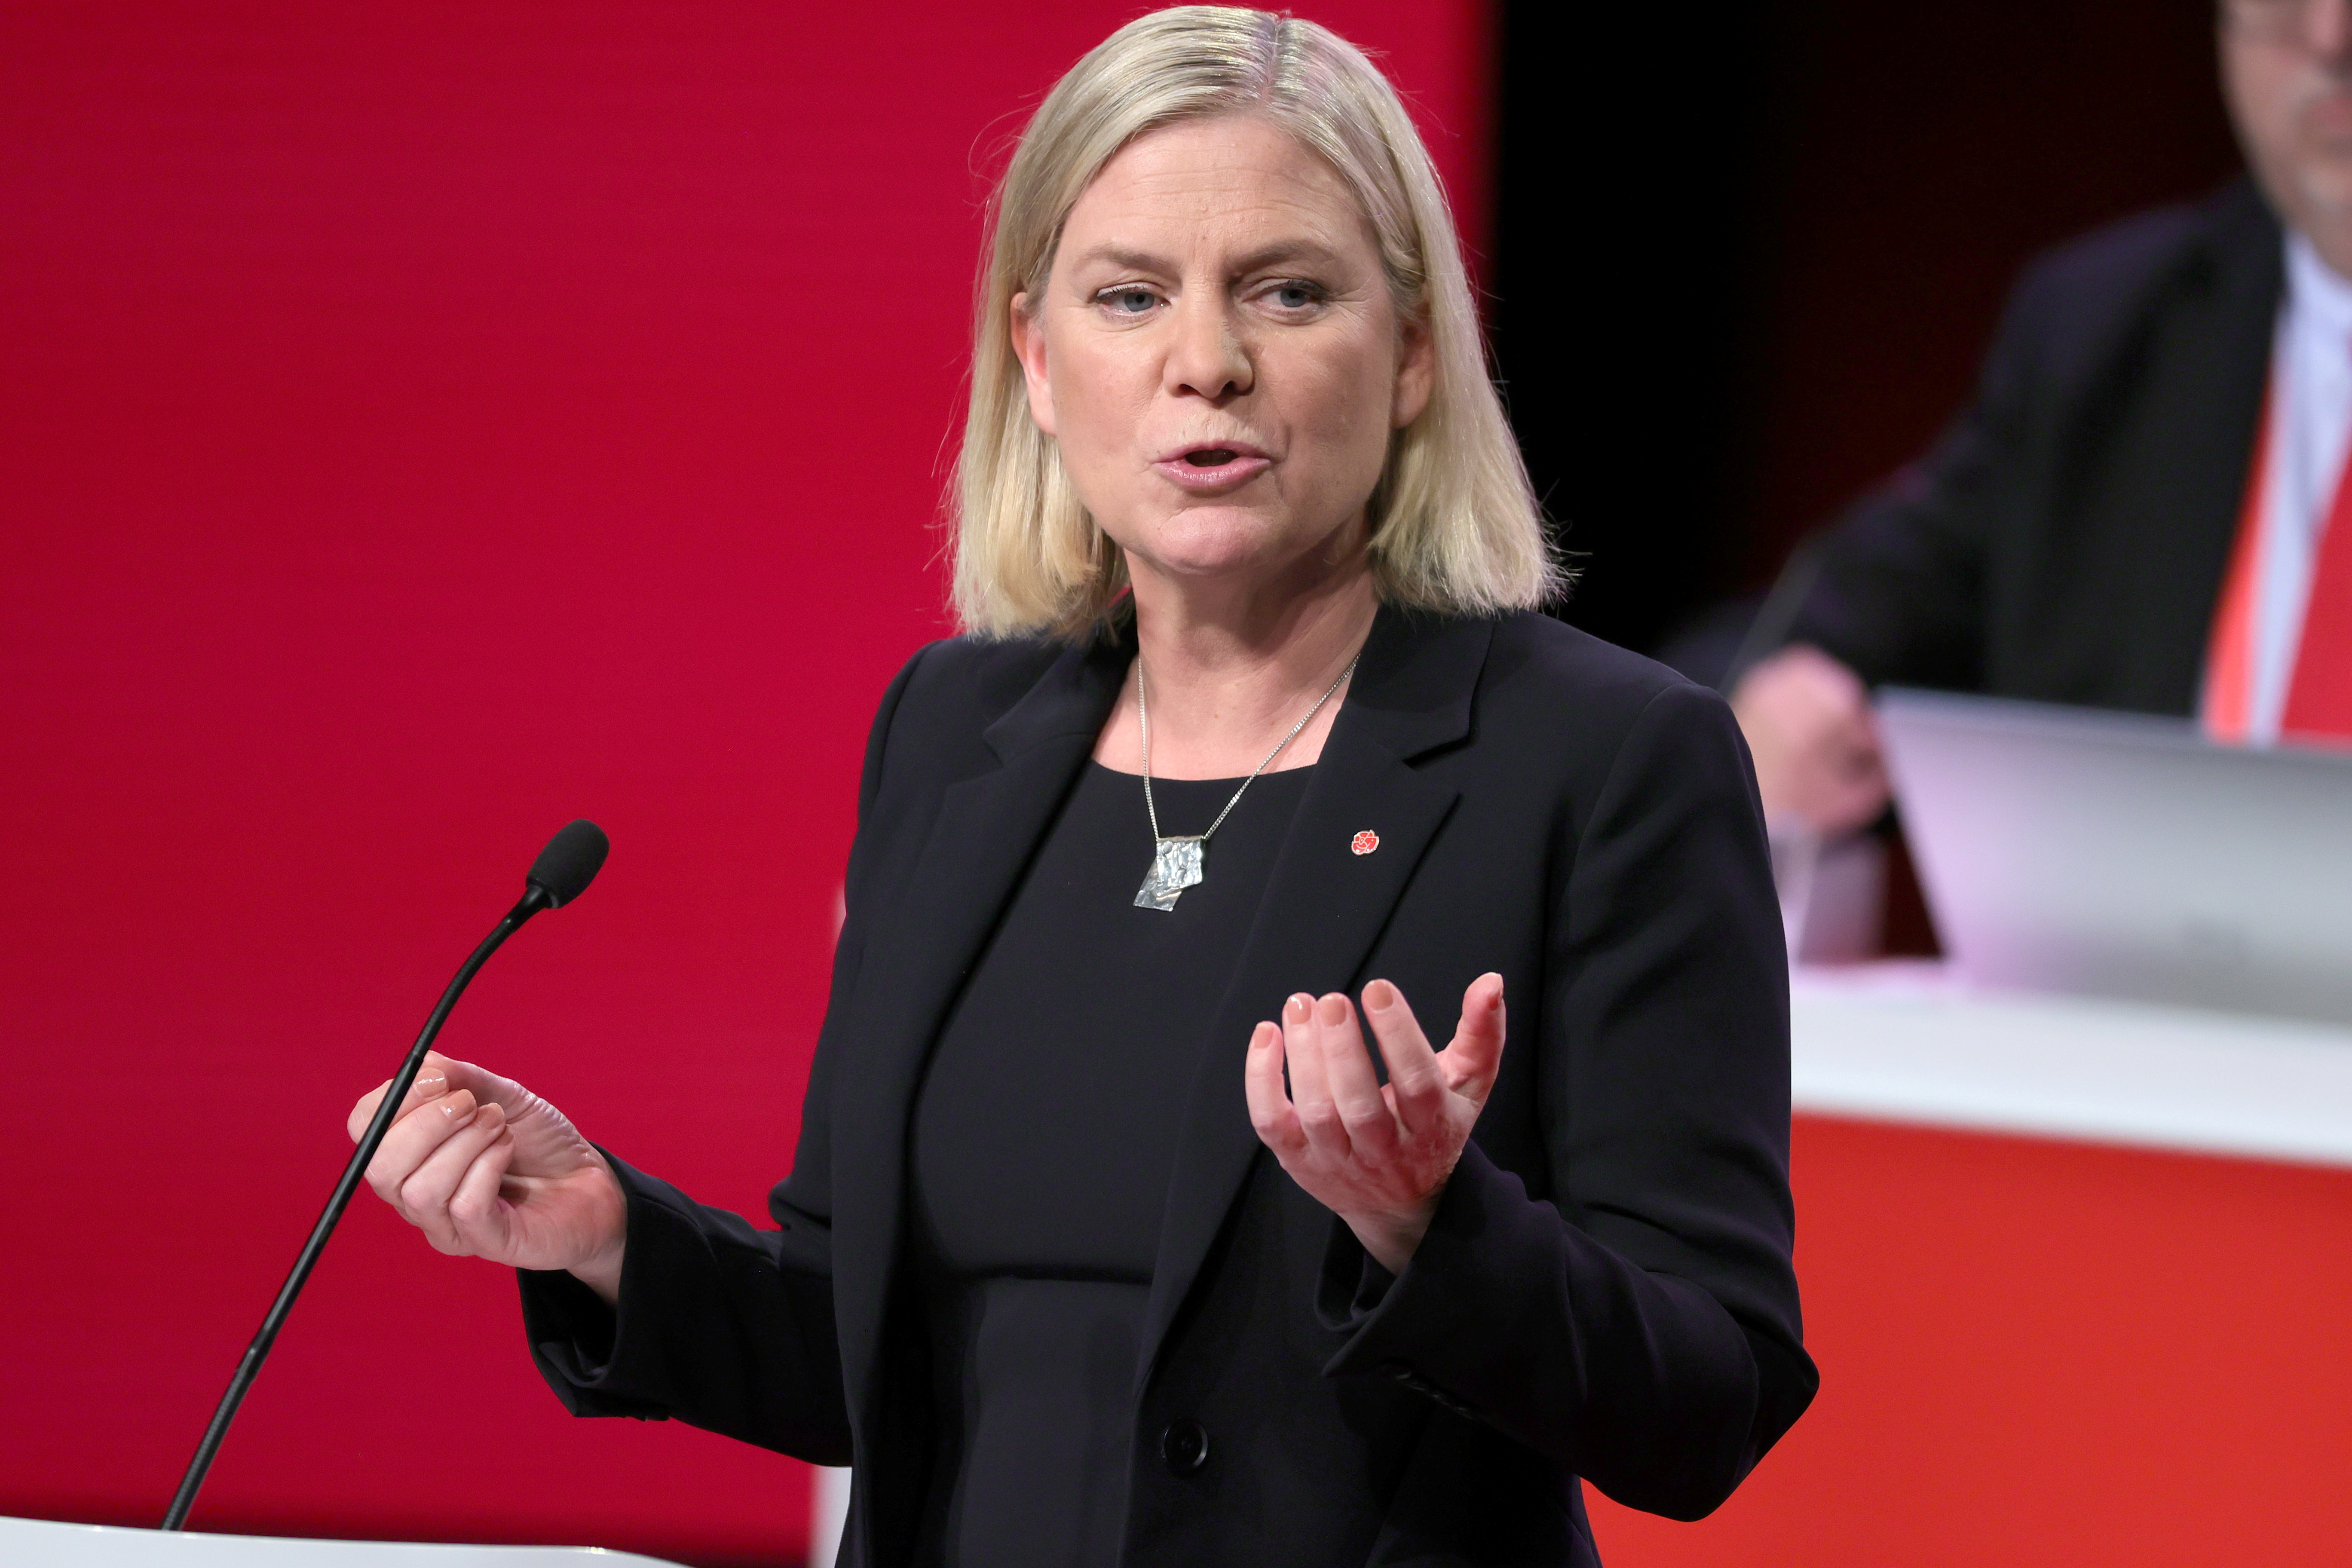 Sweden's Minister of Finance Magdalena Andersson delivers a speech after being elected as party leader of the Social Democratic Party at the party's congress, in Gothenburg, Sweden, November 4, 2021. Adam Ihse/TT News Agency via REUTERS/File Photo